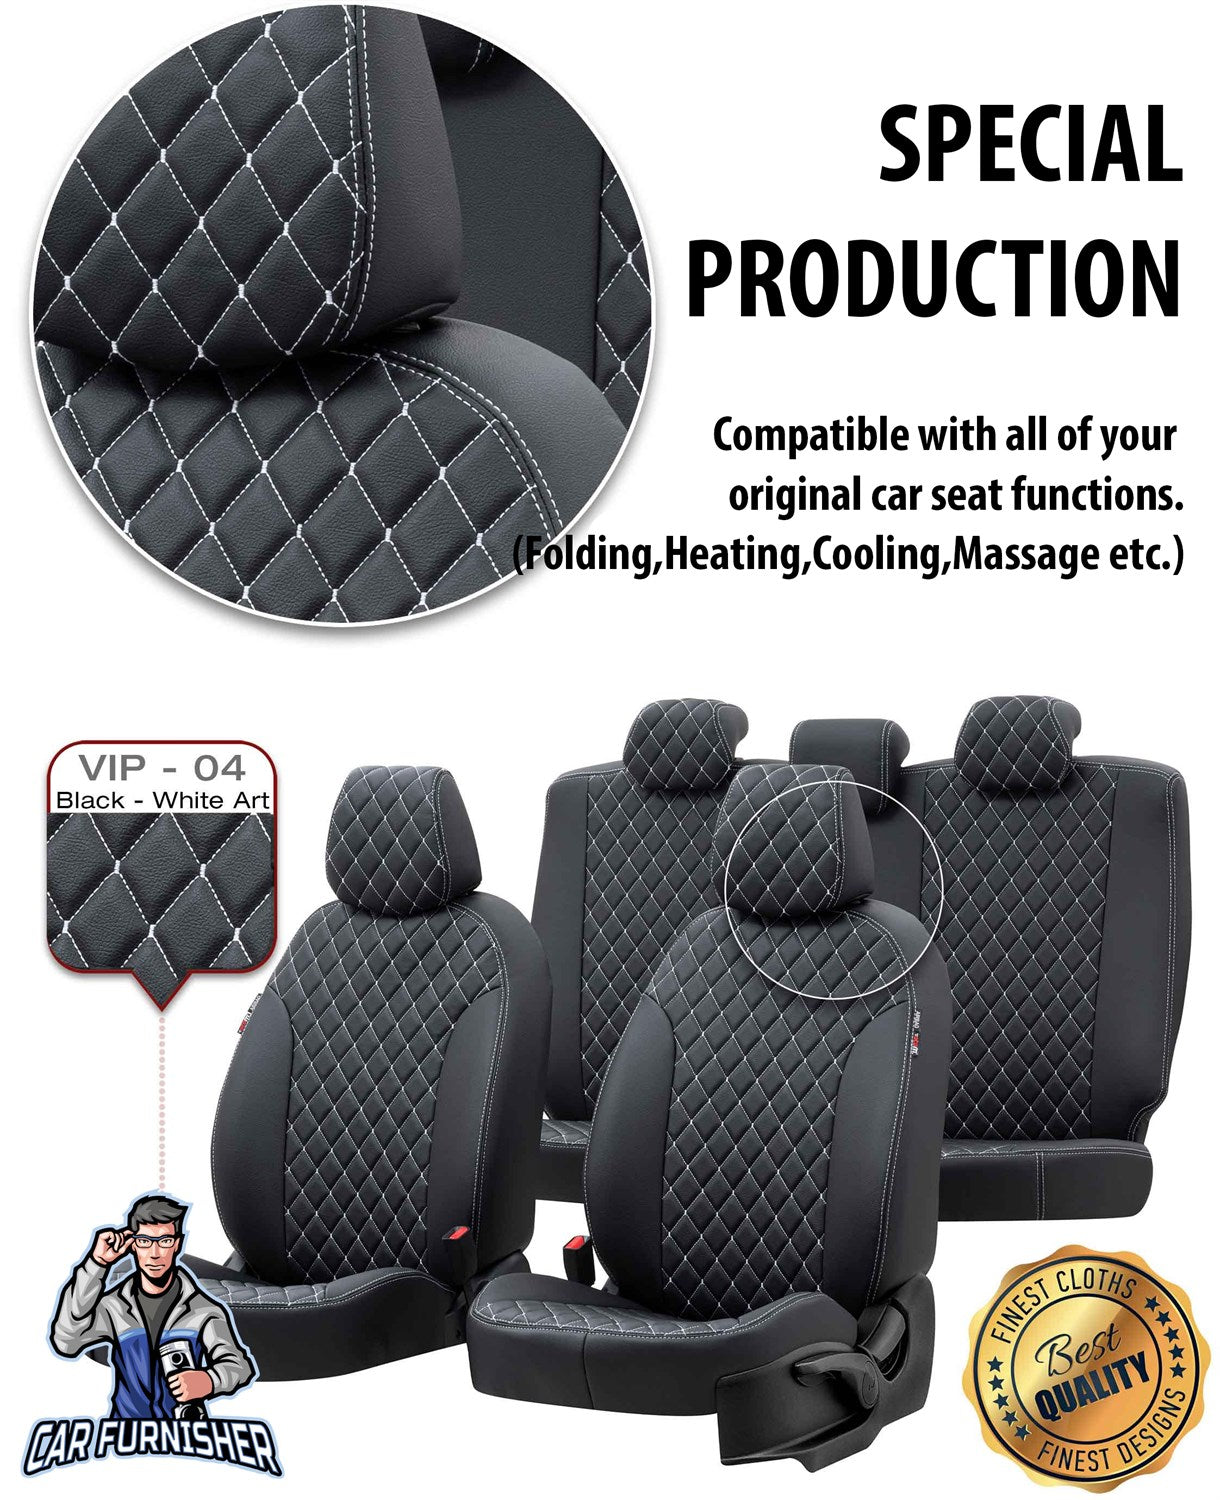 Toyota Hilux Seat Cover Madrid Leather Design Blue Leather